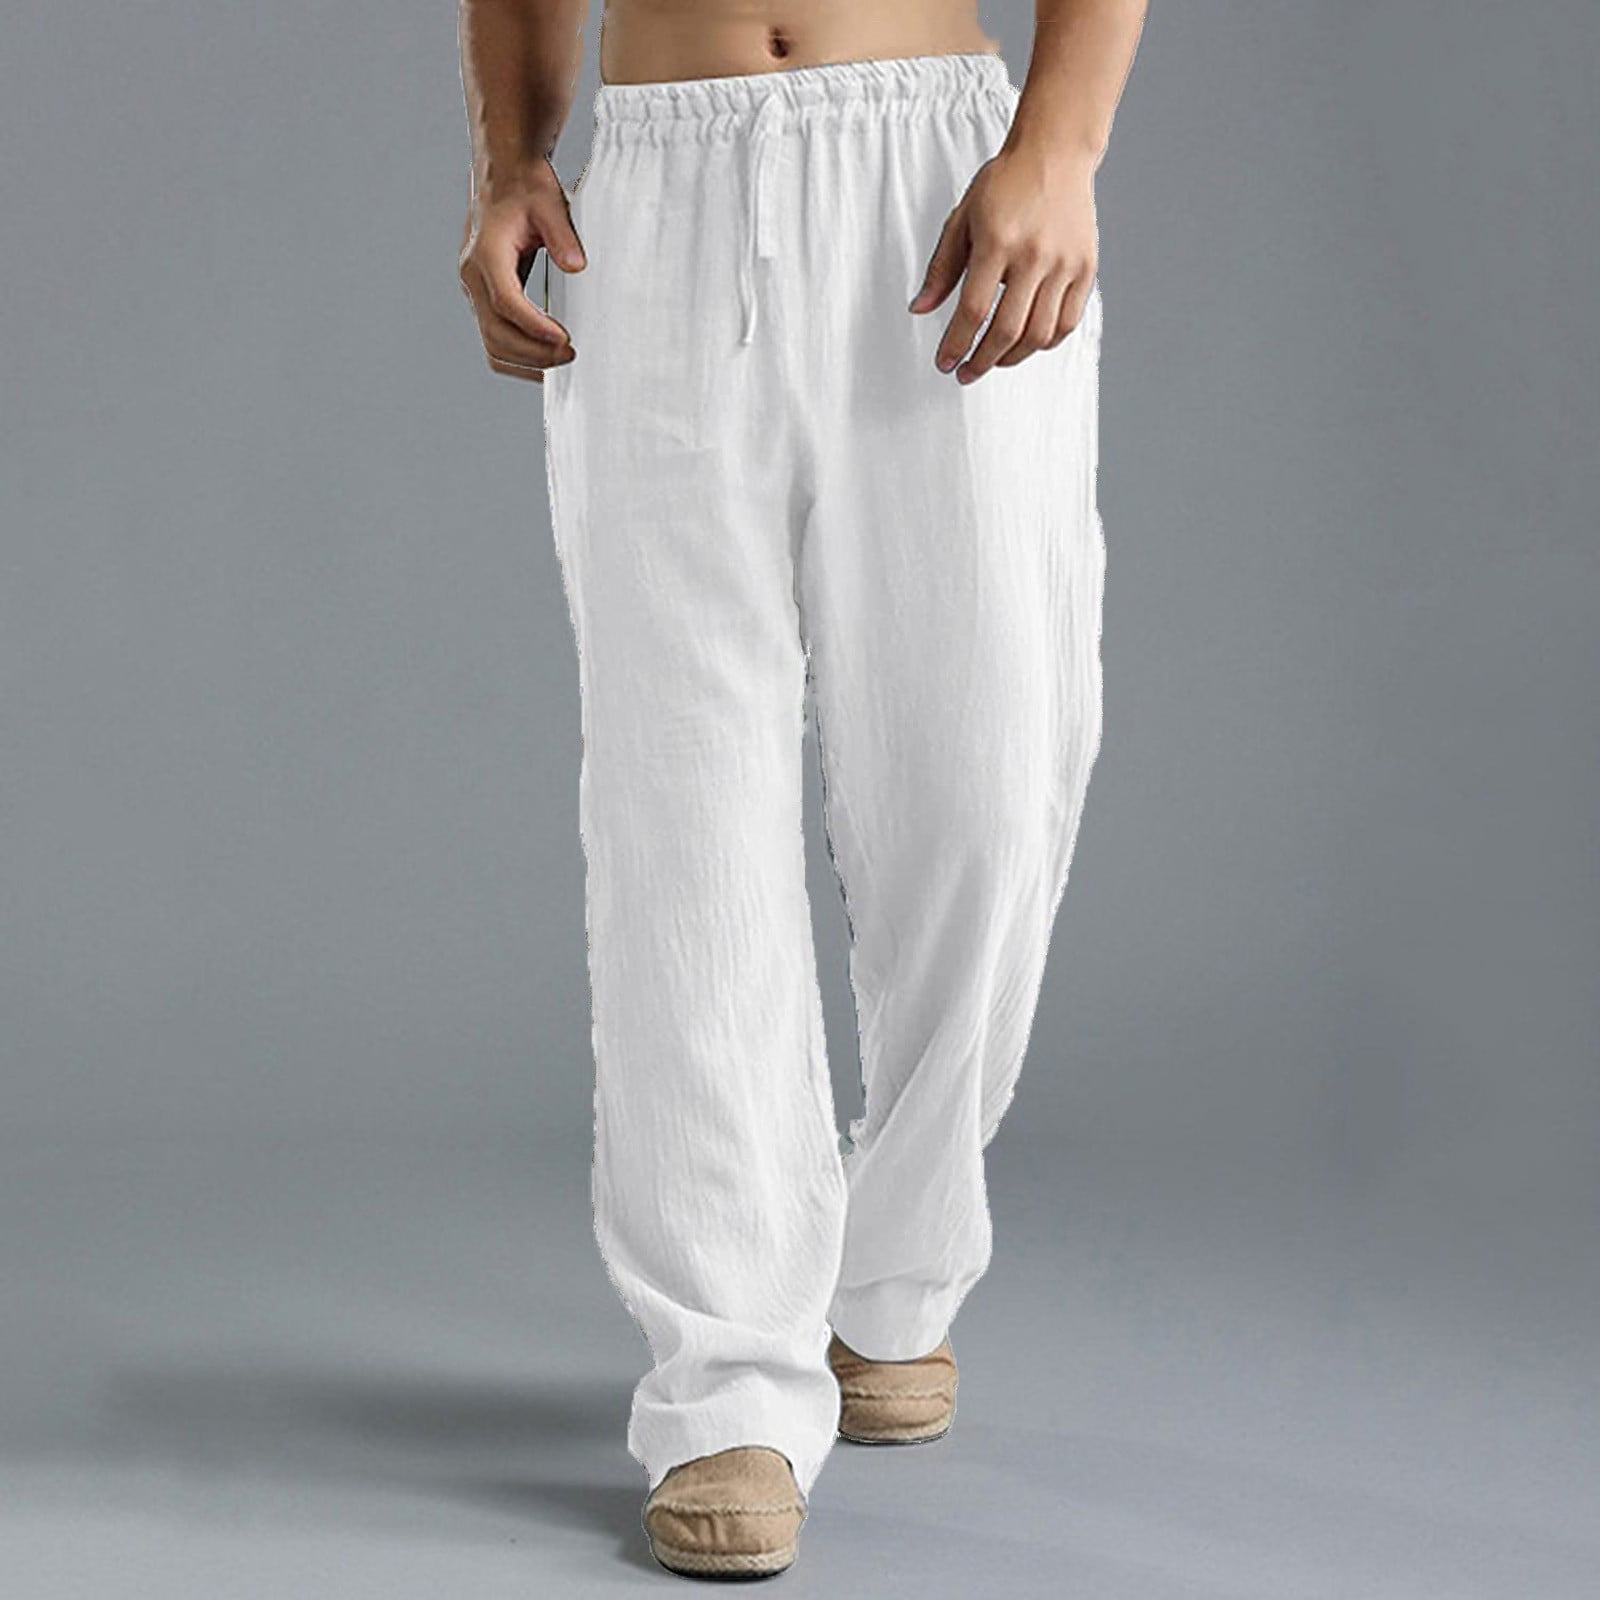 100% Cotton Gym Tapered Fit Sweat Pant